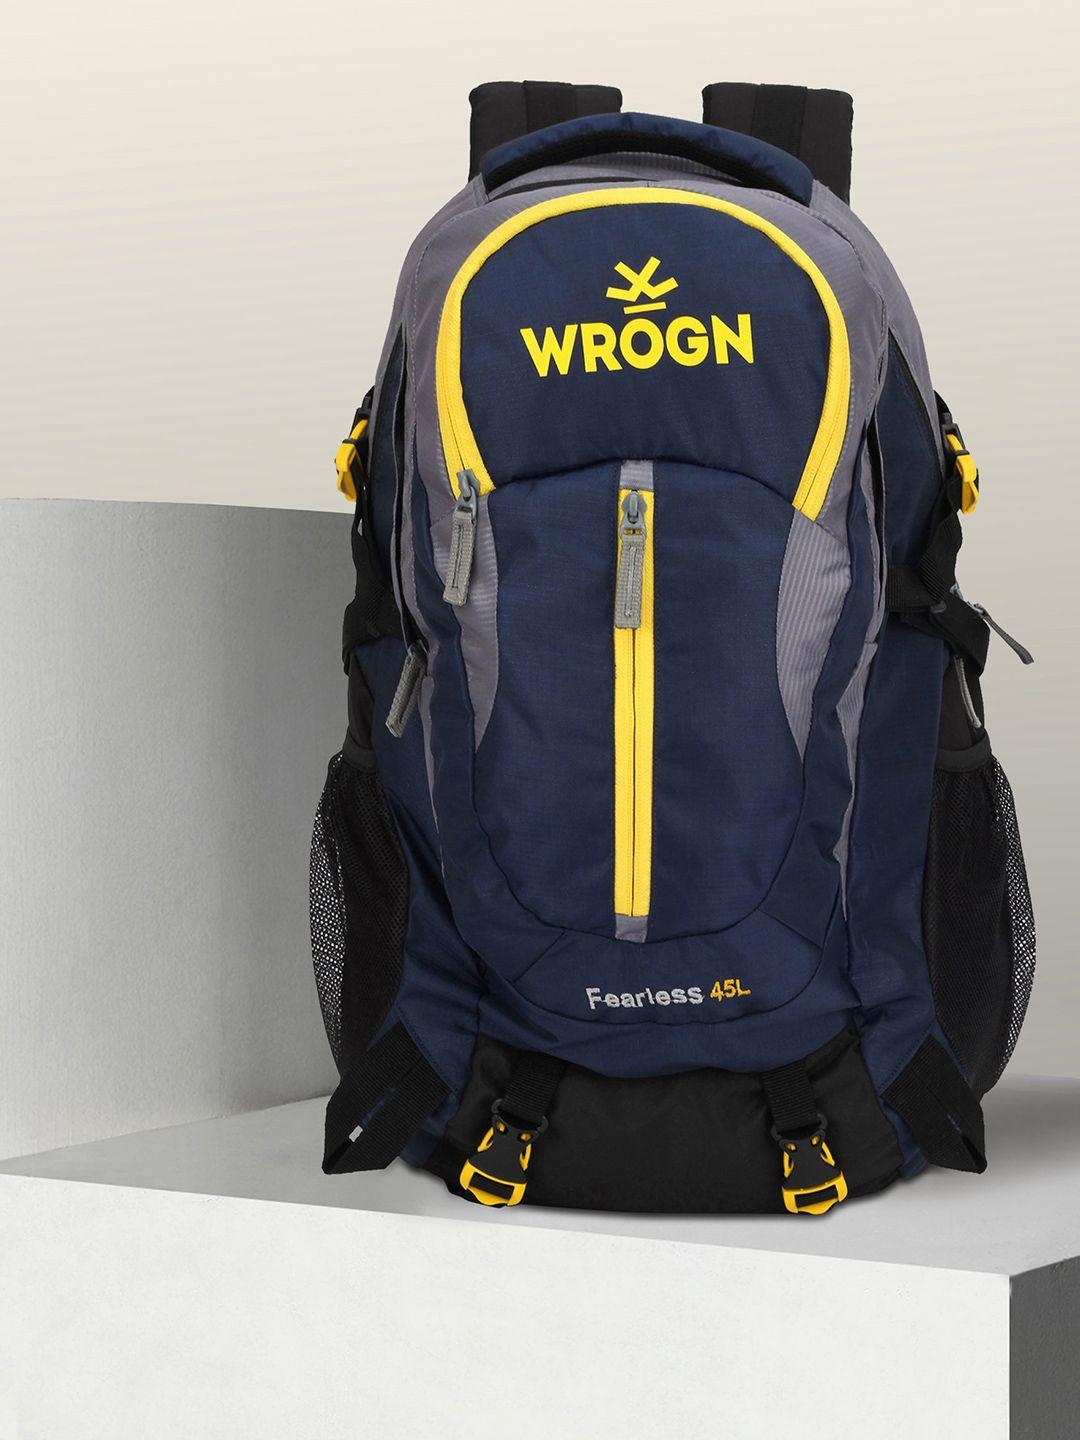 wrogn water resistant brand logo backpack with shoe pocket